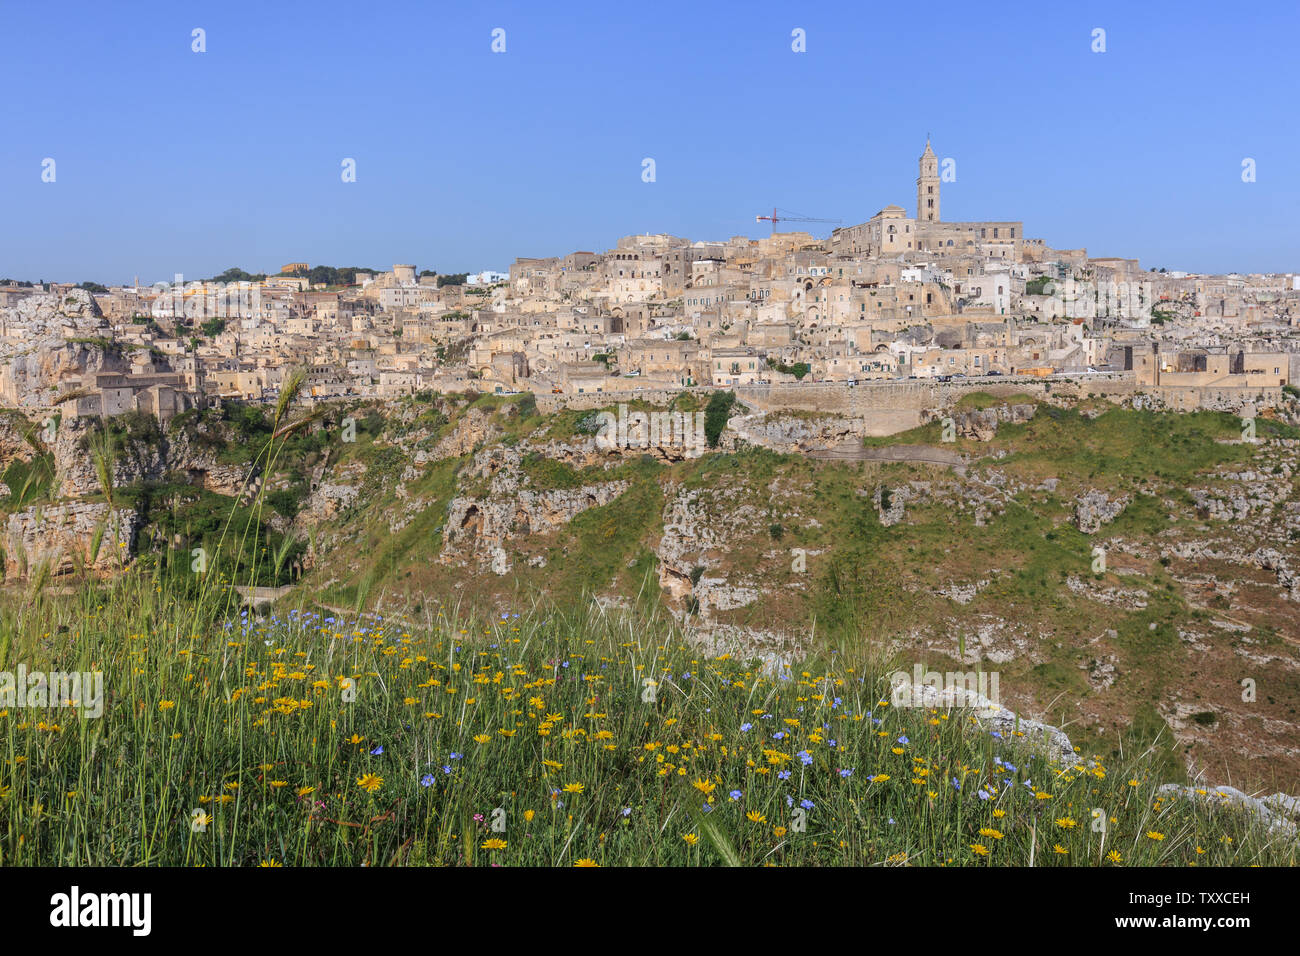 A view on the historic city Matera with the Canyon of Matera in Basilicata, Italy Stock Photo